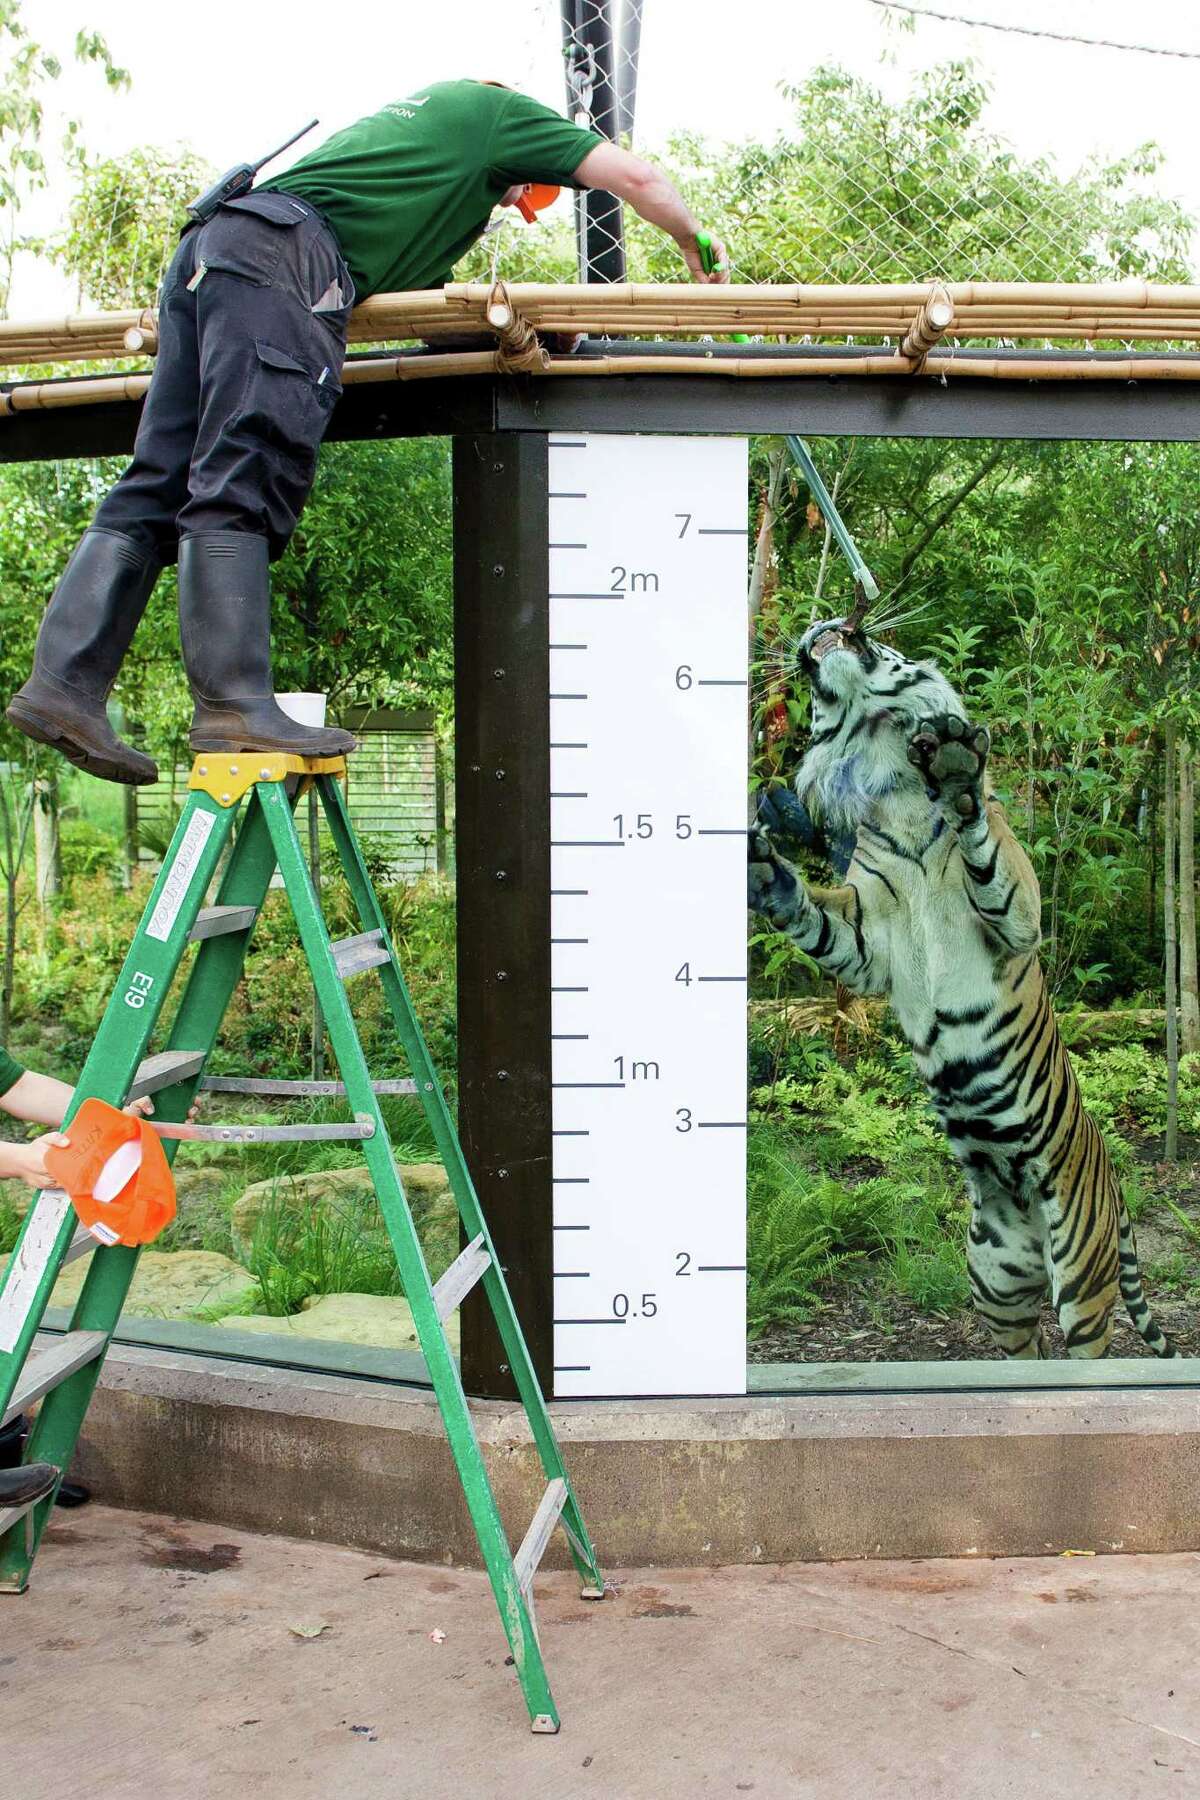 Jae Jae, a Sumatran tiger, is measured during the London Zoo's annual weigh-in in London on August 21, 2013. The task involves weighing and measuring the population of the zoo, before the information is shared with zoos across the world, allowing them to compare data on thousands of endangered species. AFP PHOTO/Leon NealLEON NEAL/AFP/Getty Images